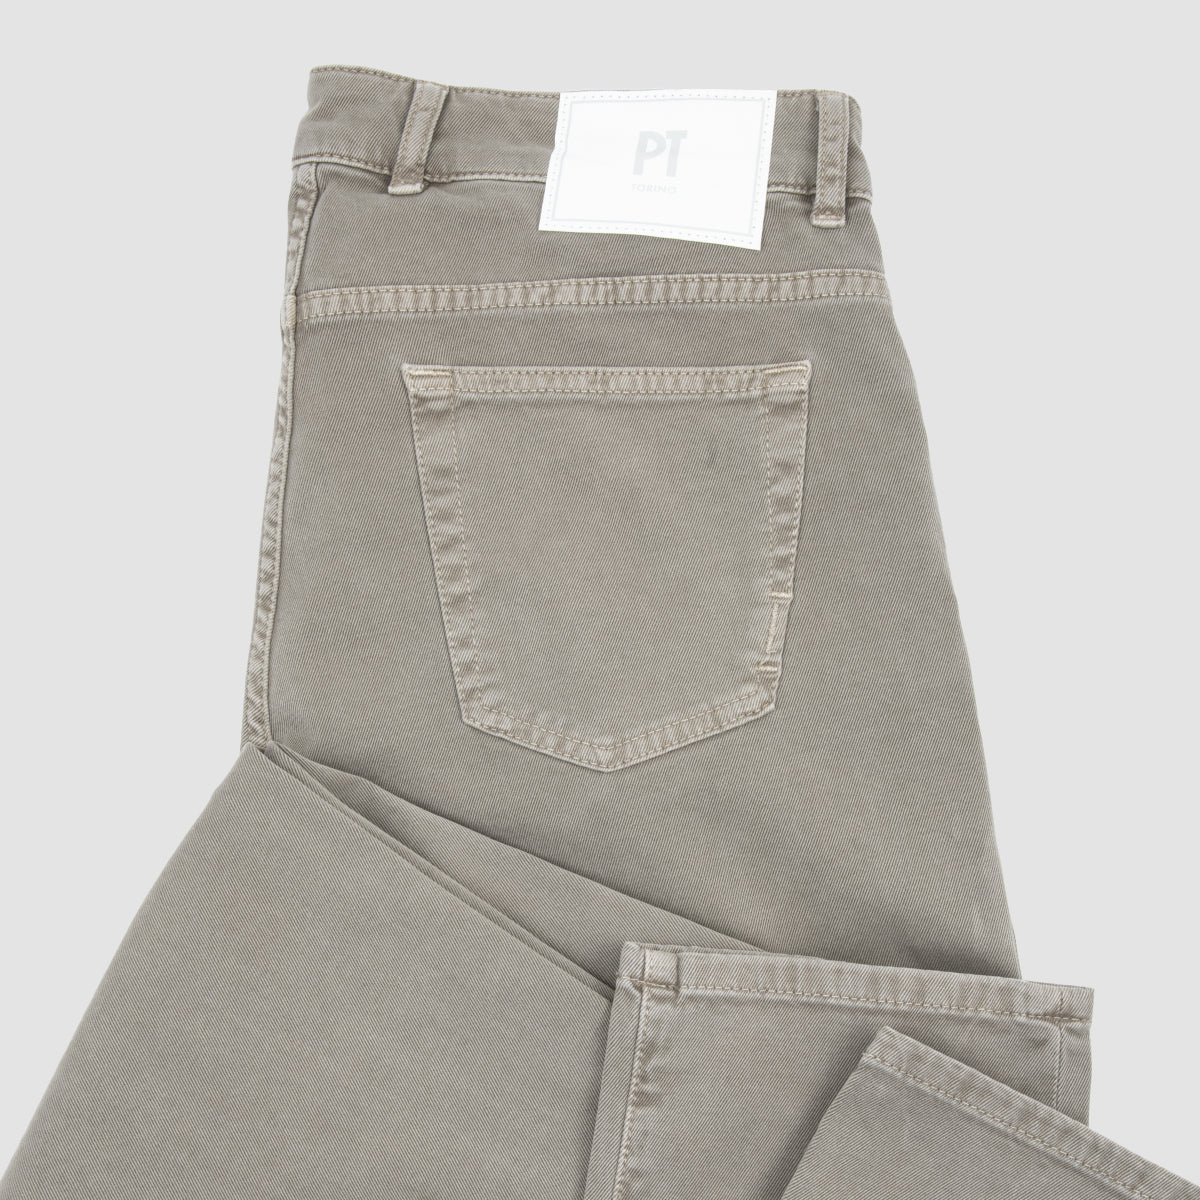 5 Pocket Trousers Cotton Cashmere Stretch Drill - Y121 Taupe